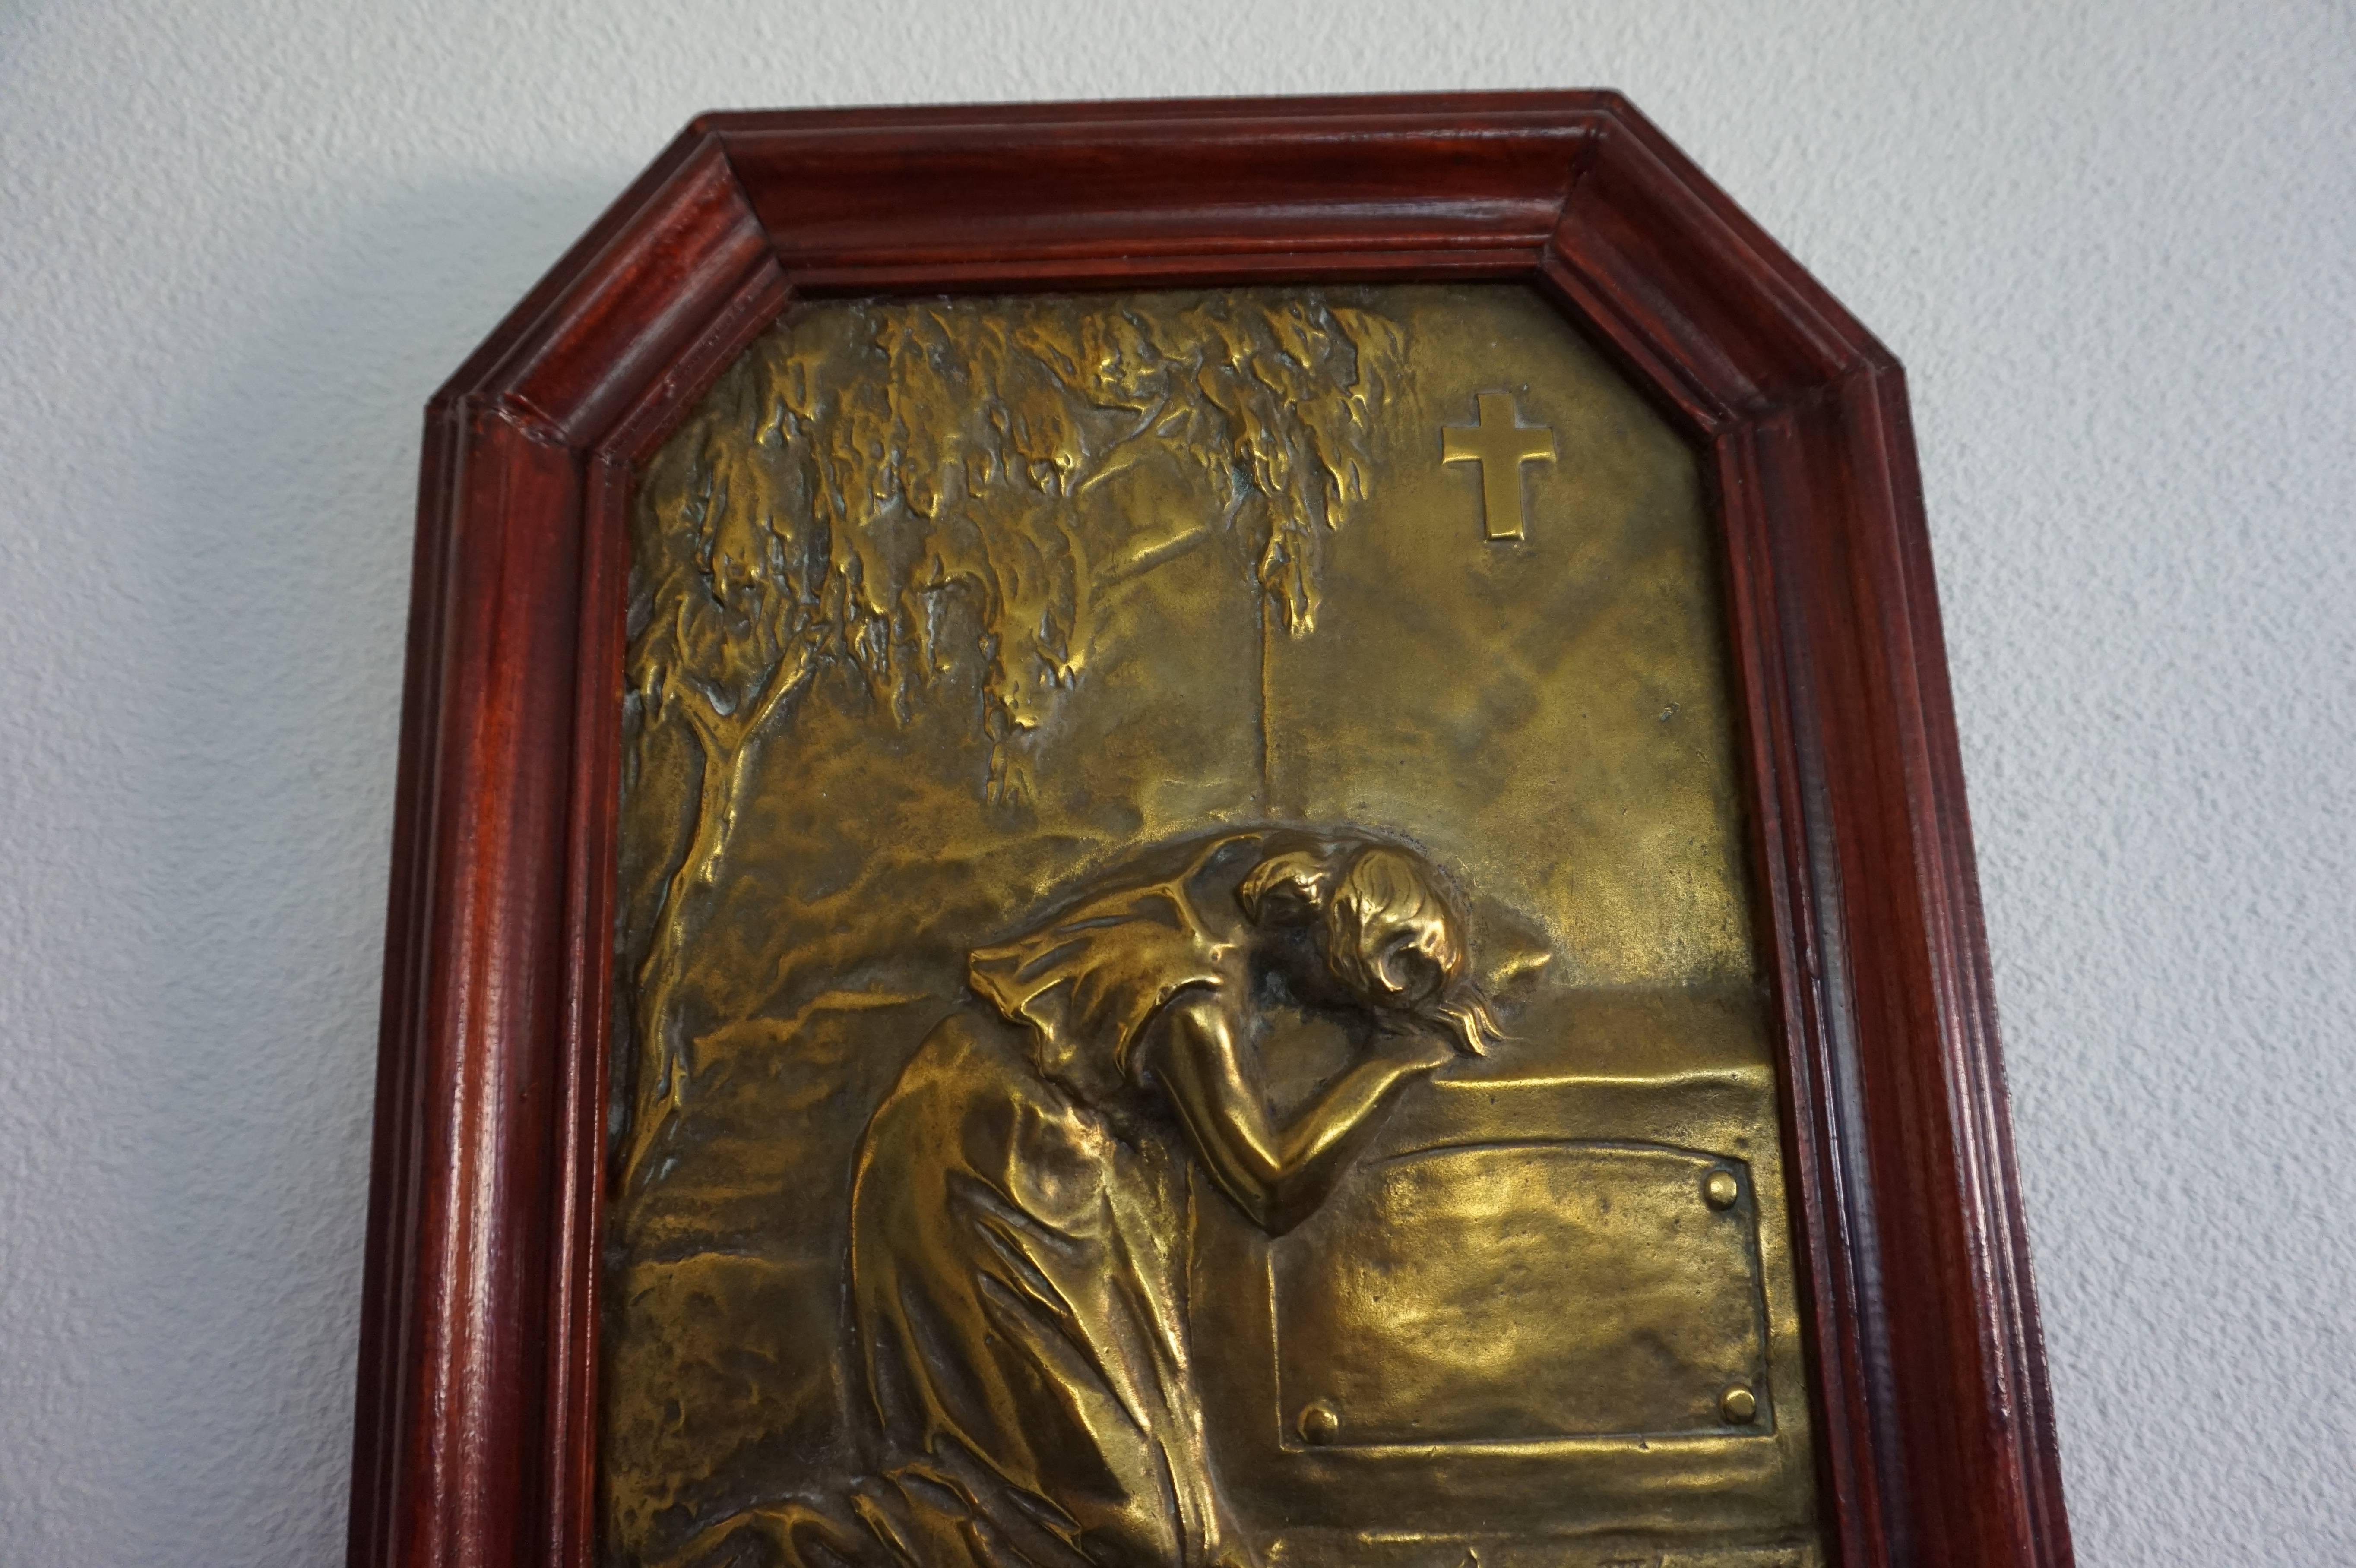 Beautifully executed but tragic at the same time.

This rare and very well made Art Nouveau work of art is in excellent condition. The mahogany colored wooden frame is made to look old and this is well done, but it is of a later date. We don't